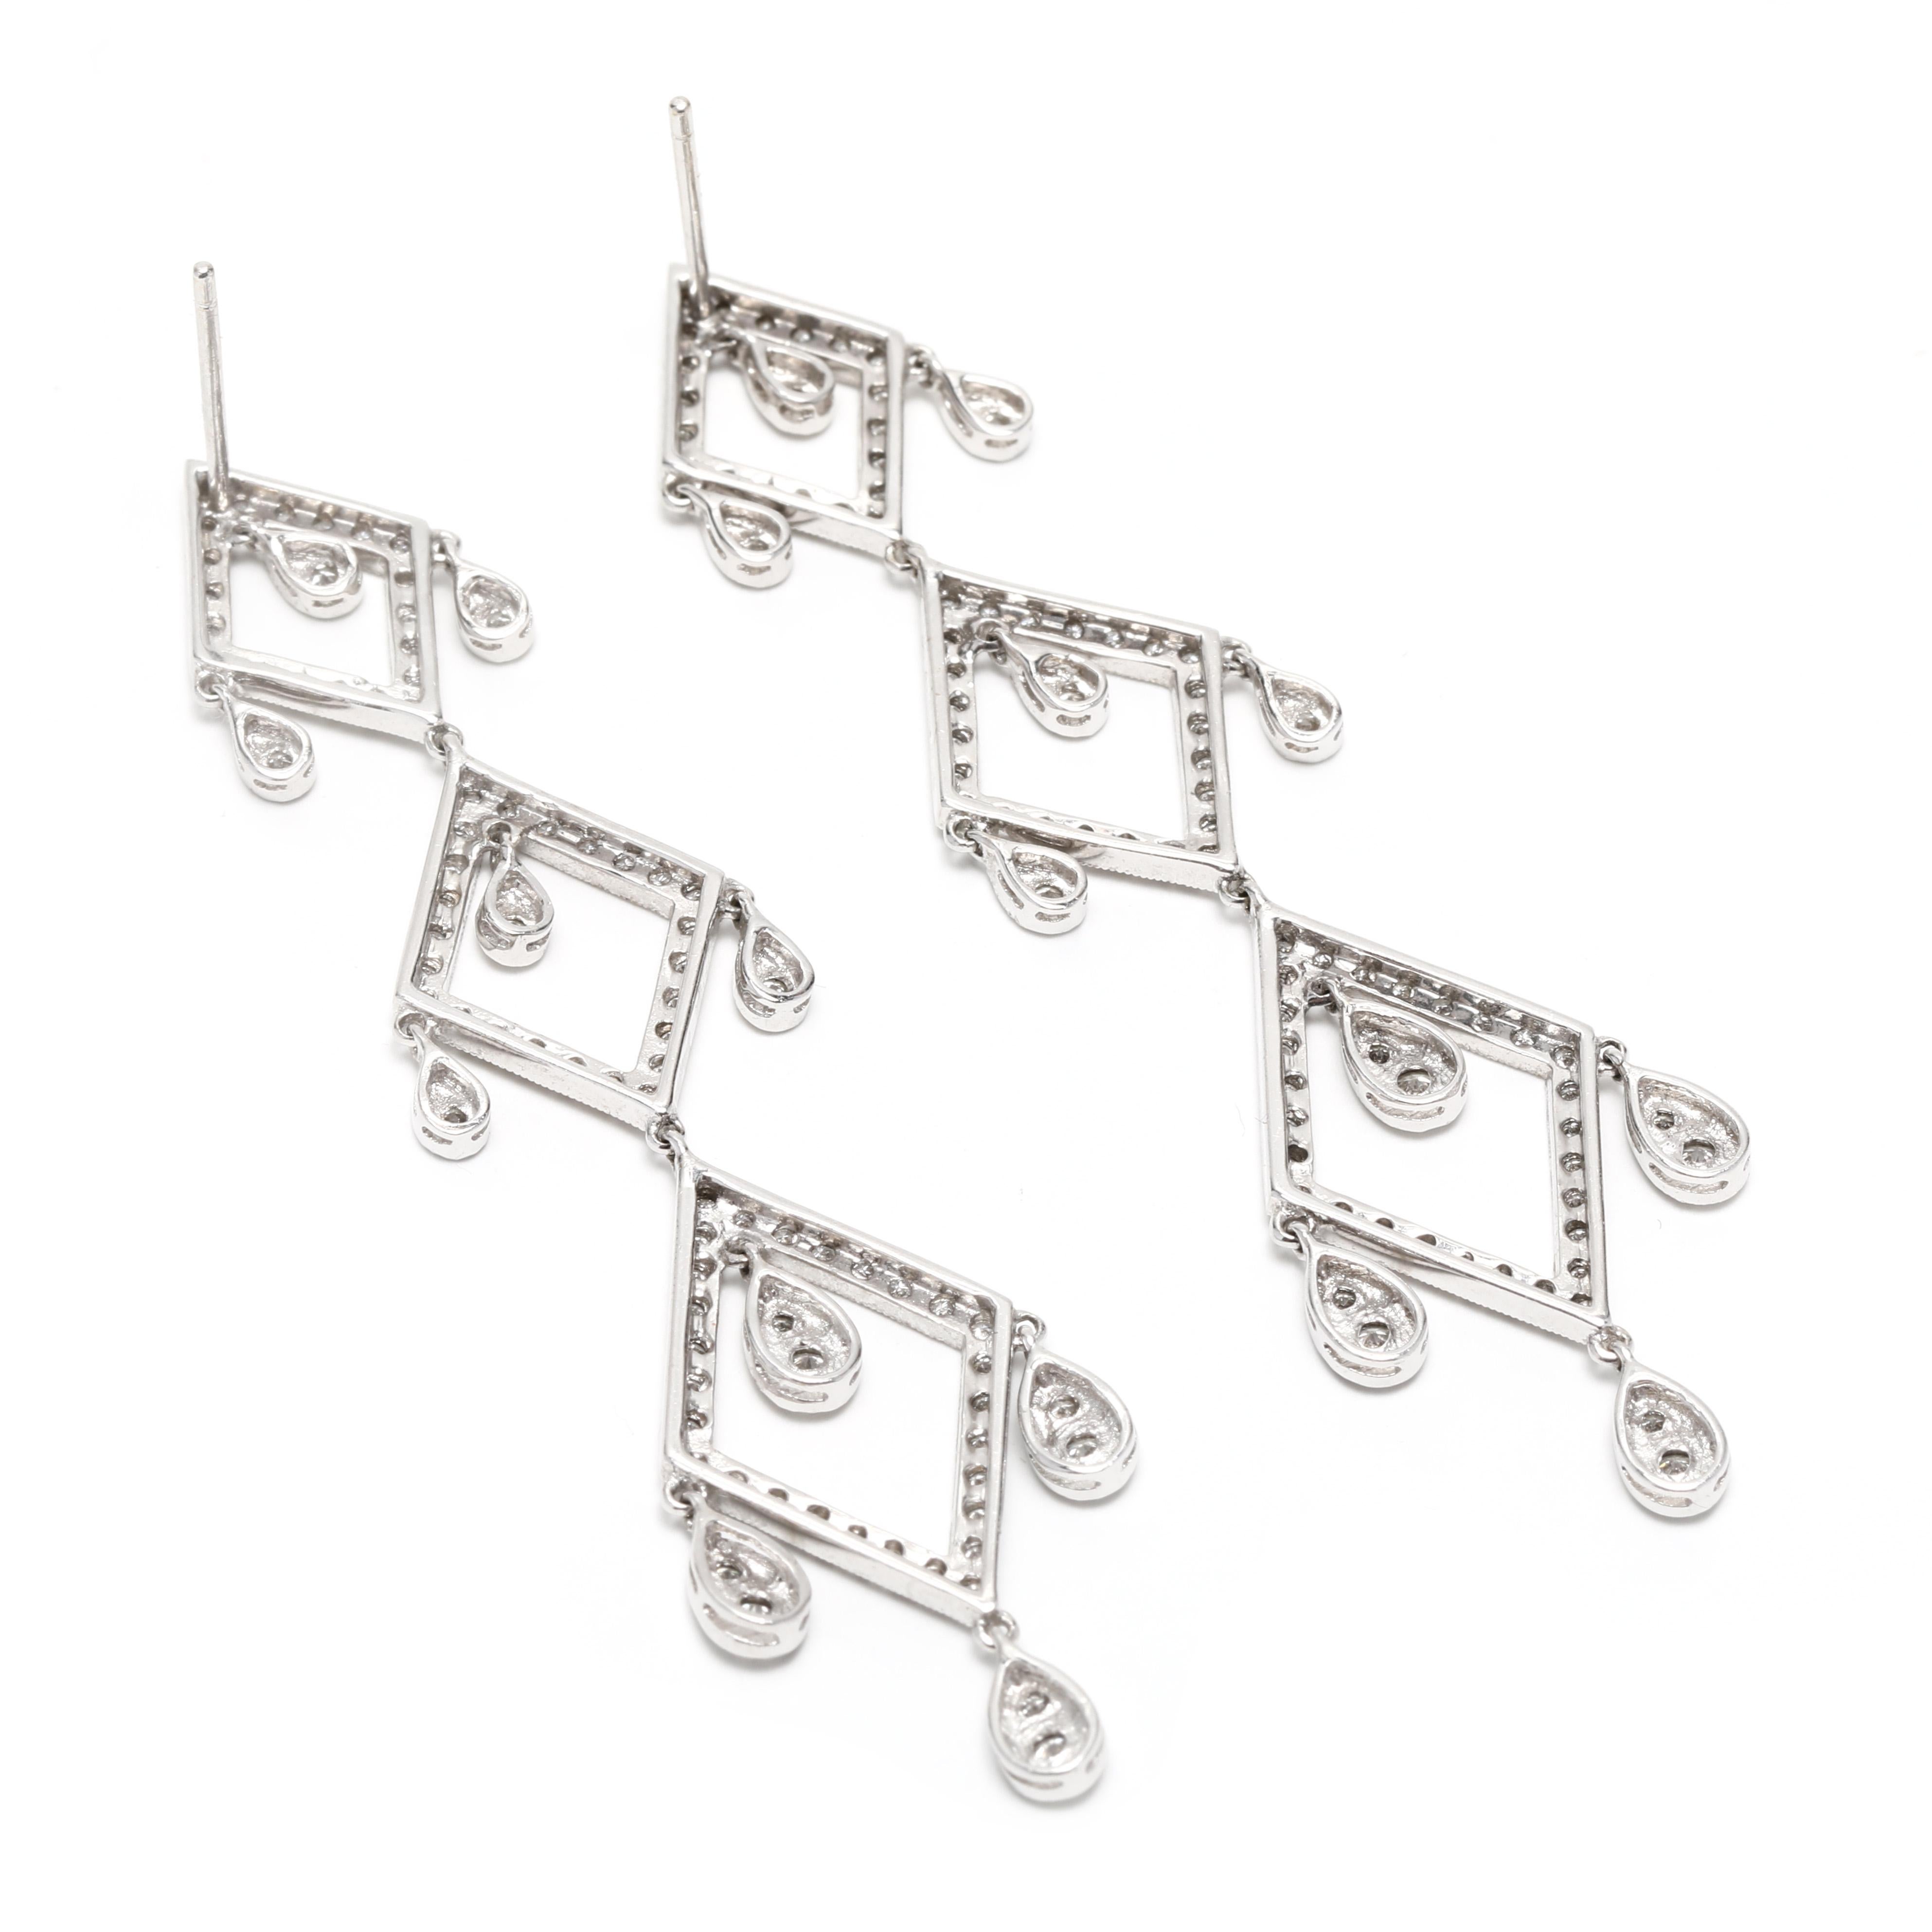 These stunning 1ctw Diamond Chandelier Earrings are the perfect accessory for your special day! Crafted from luxurious 18k white gold, these earrings feature a length of 2.5 inches and are adorned with sparkling diamonds, making them the perfect